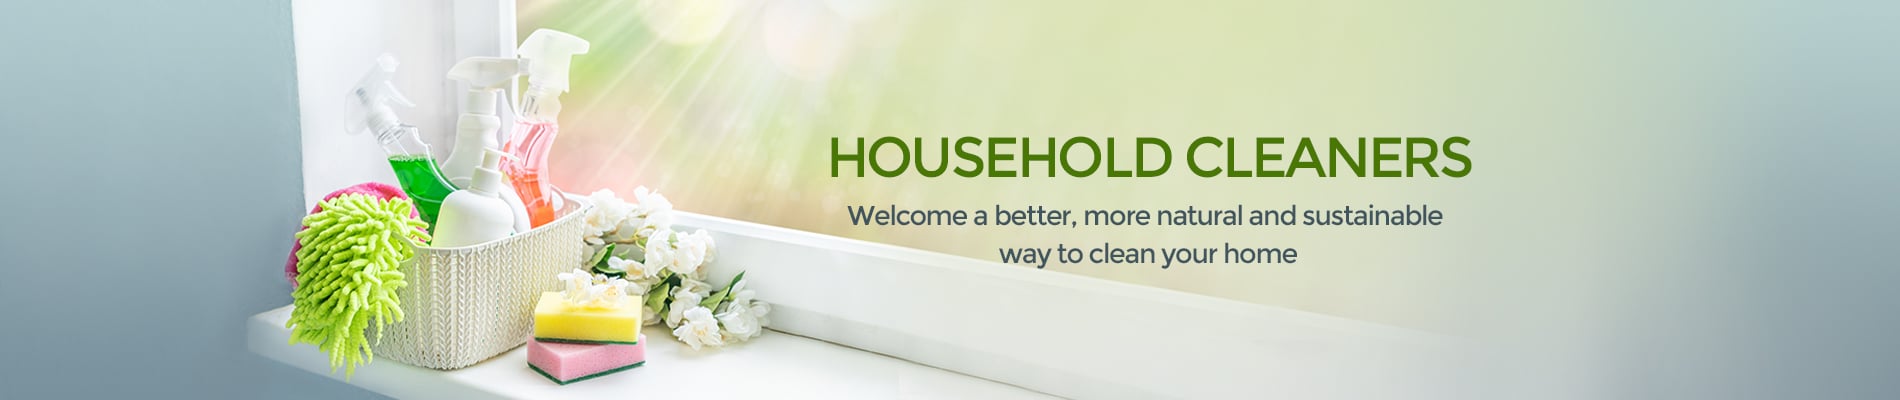 Eco-Friendly and Sustainable Household Cleaners at Wholesale Prices